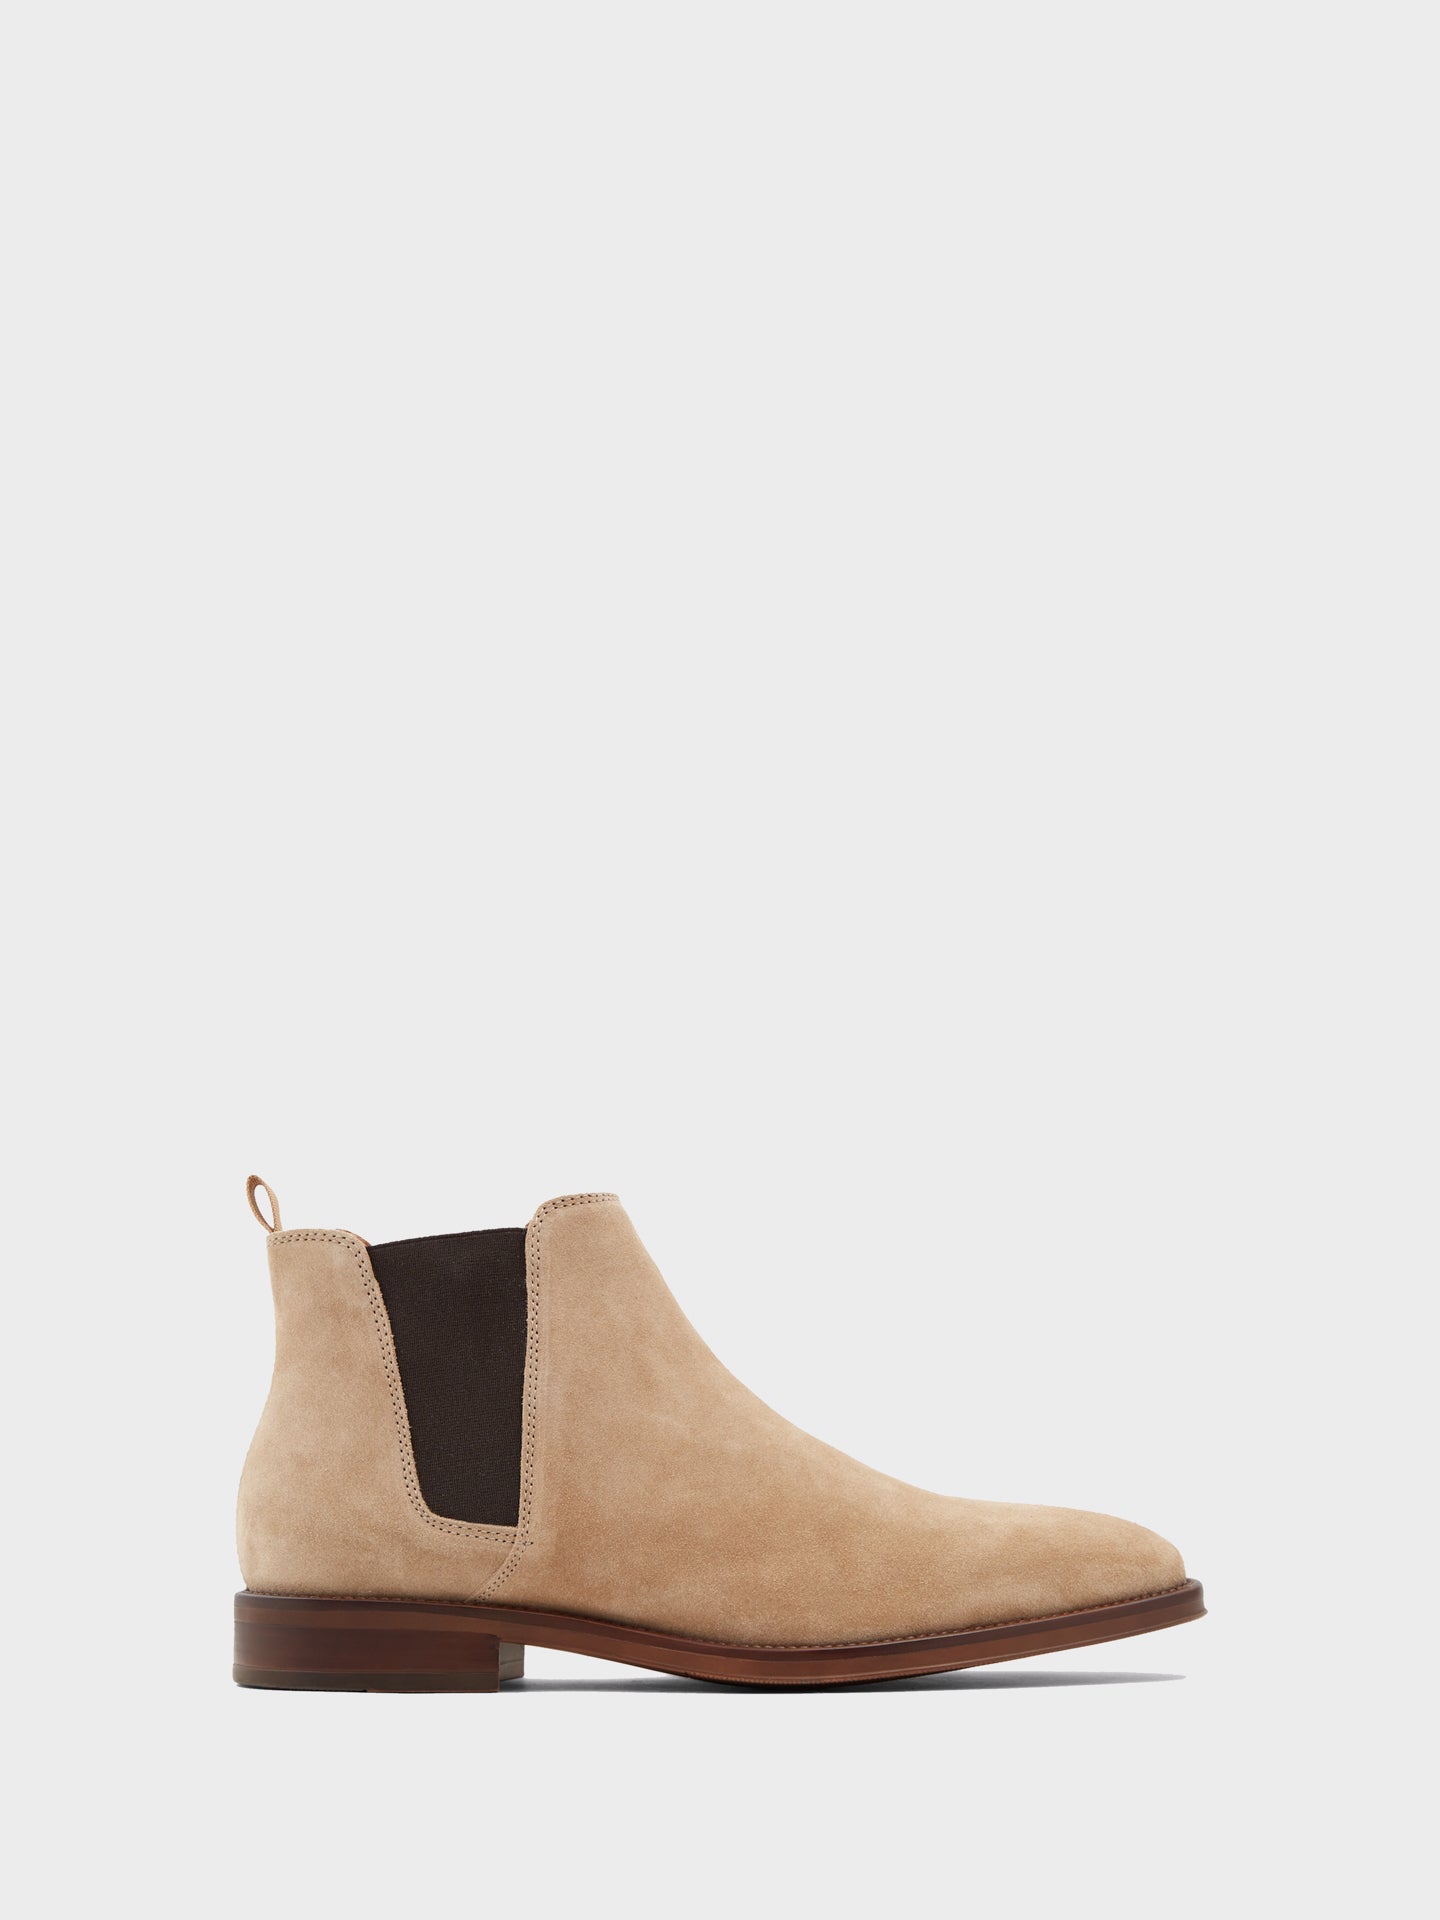 Aldo Light Brown Round Toe Ankle Boots